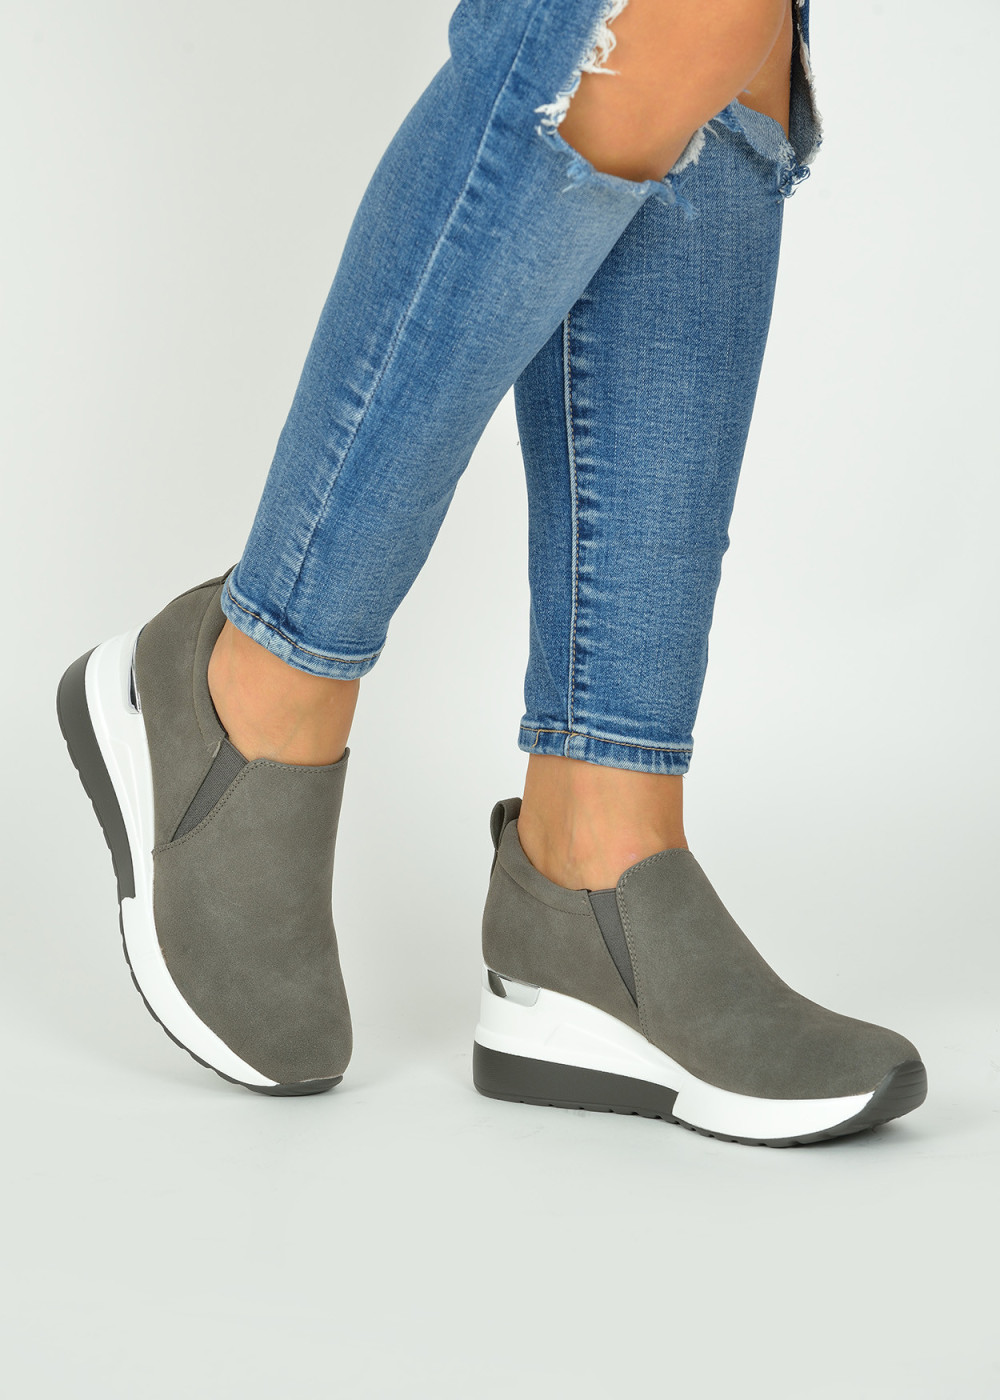 Grey hidden wedge Shoelace - Women's Shoes, Bags and Fashion